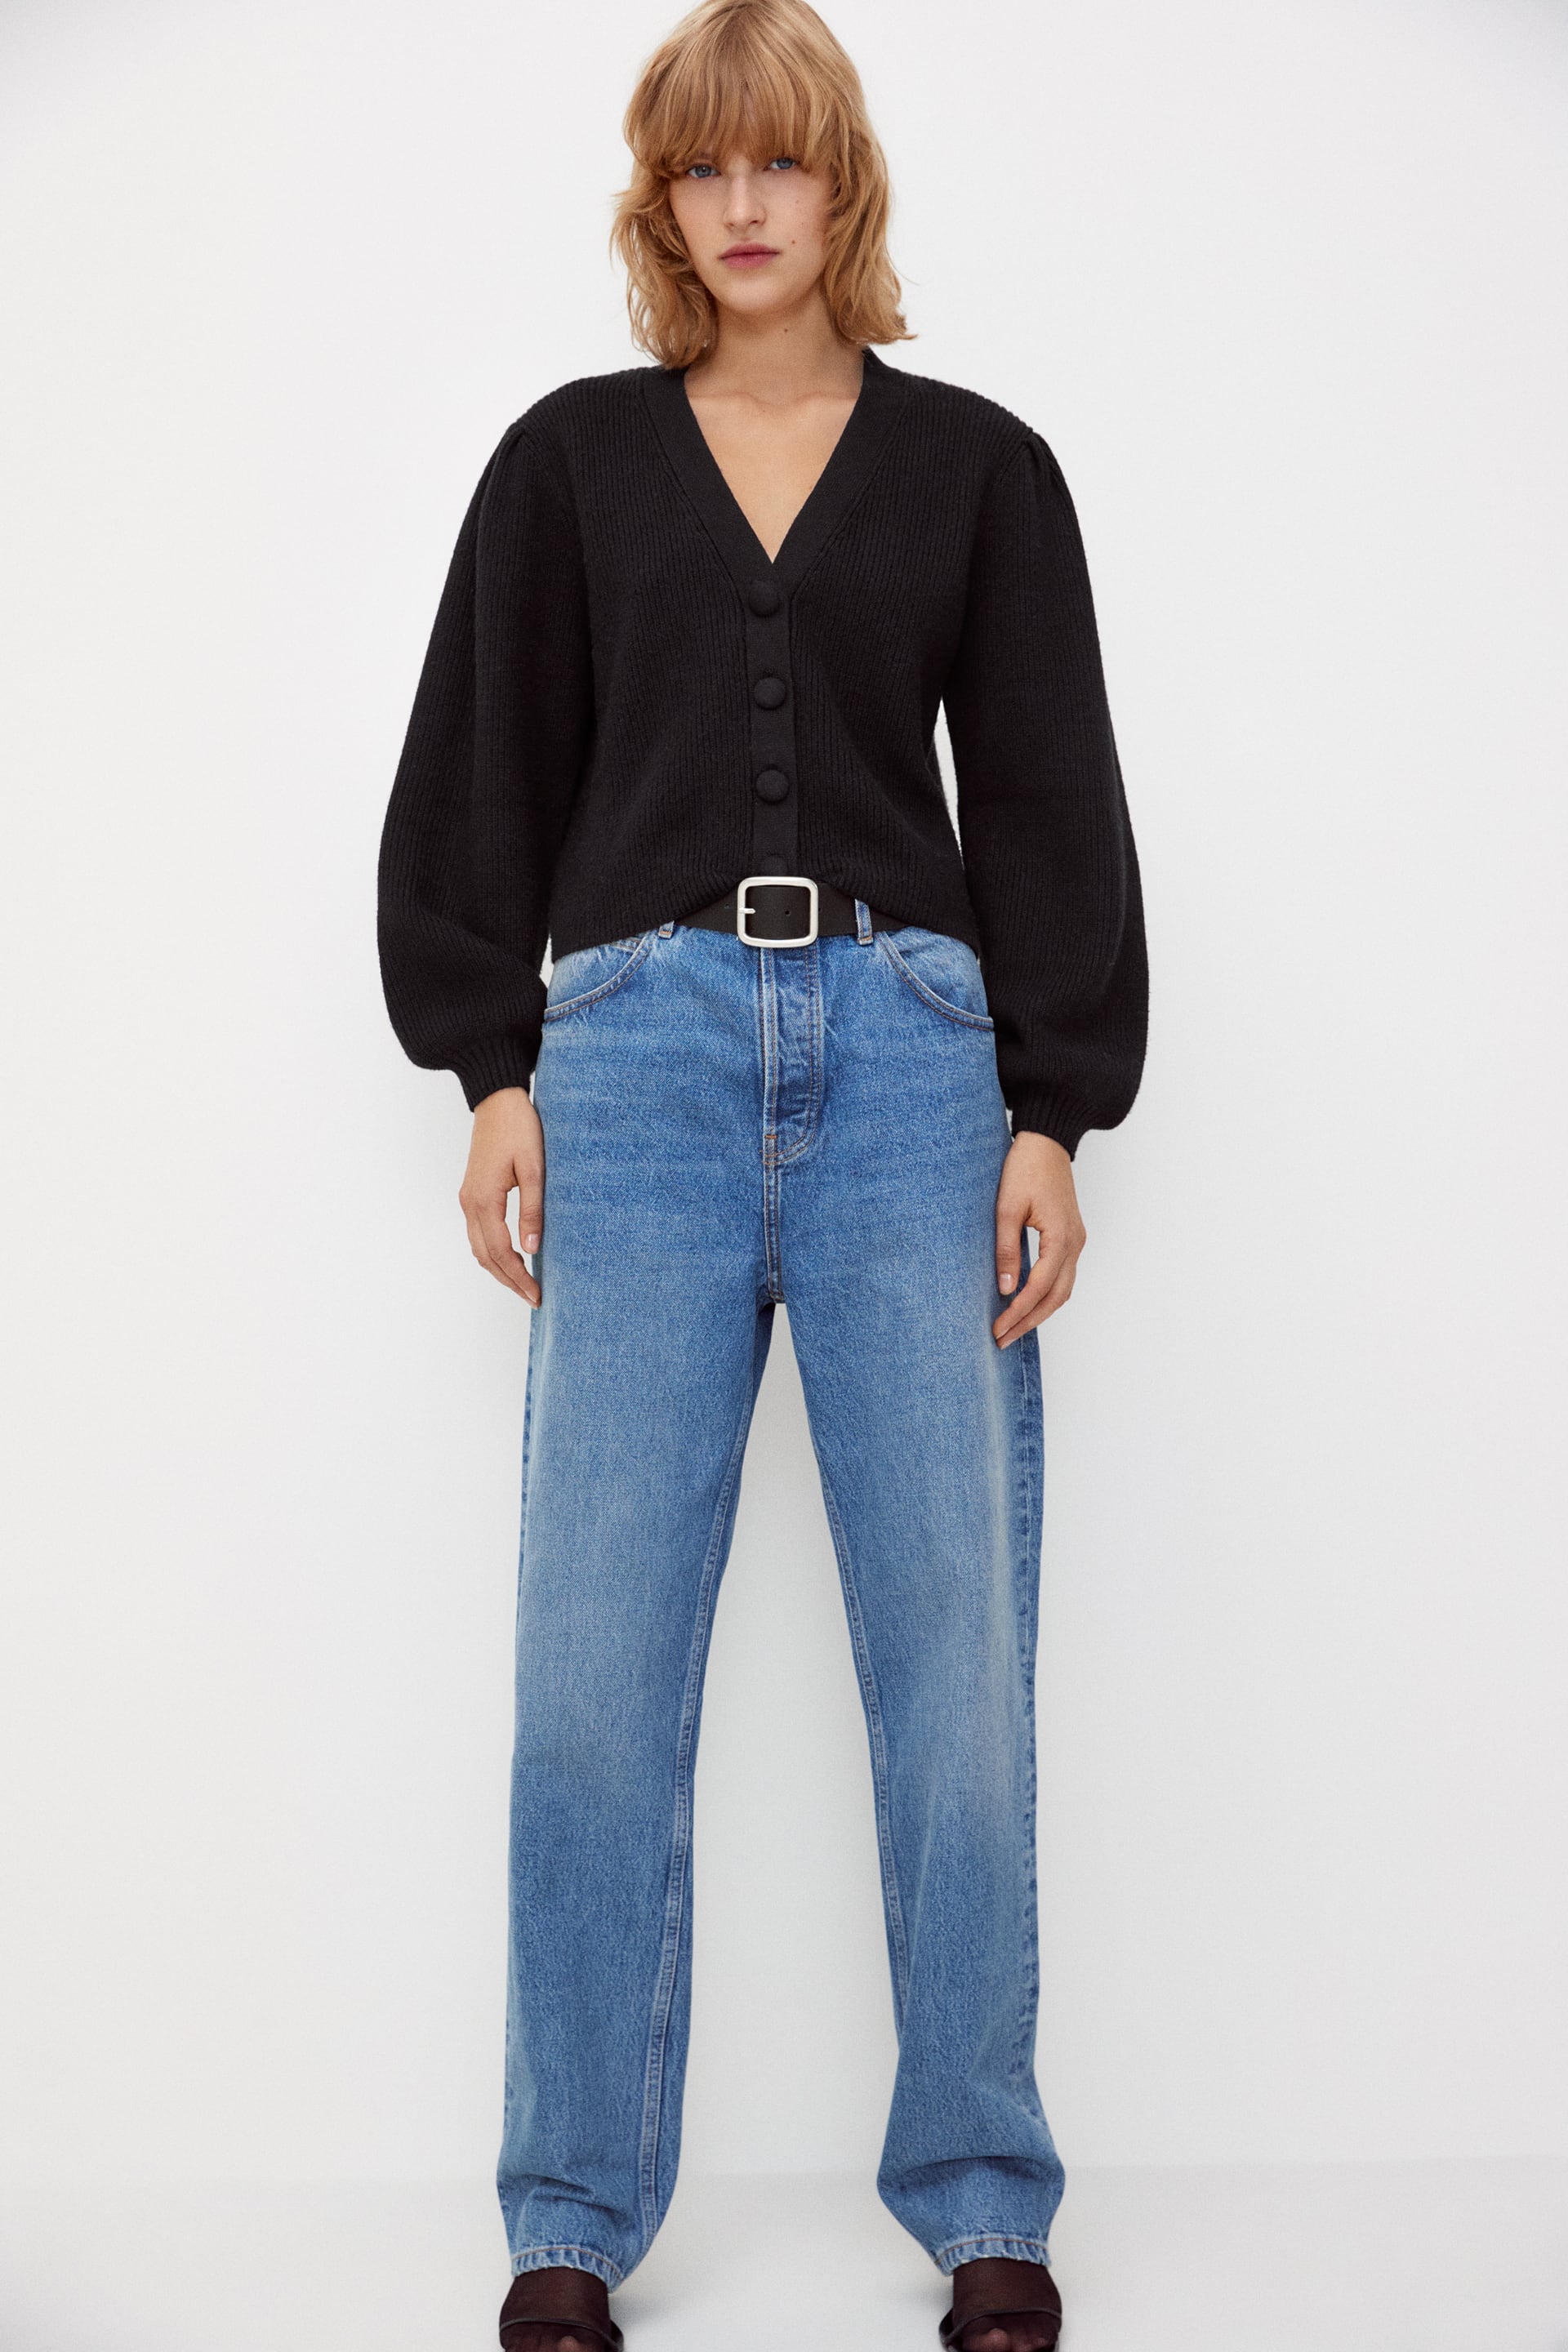 31 of the Best Cheap Zara Items to Buy 